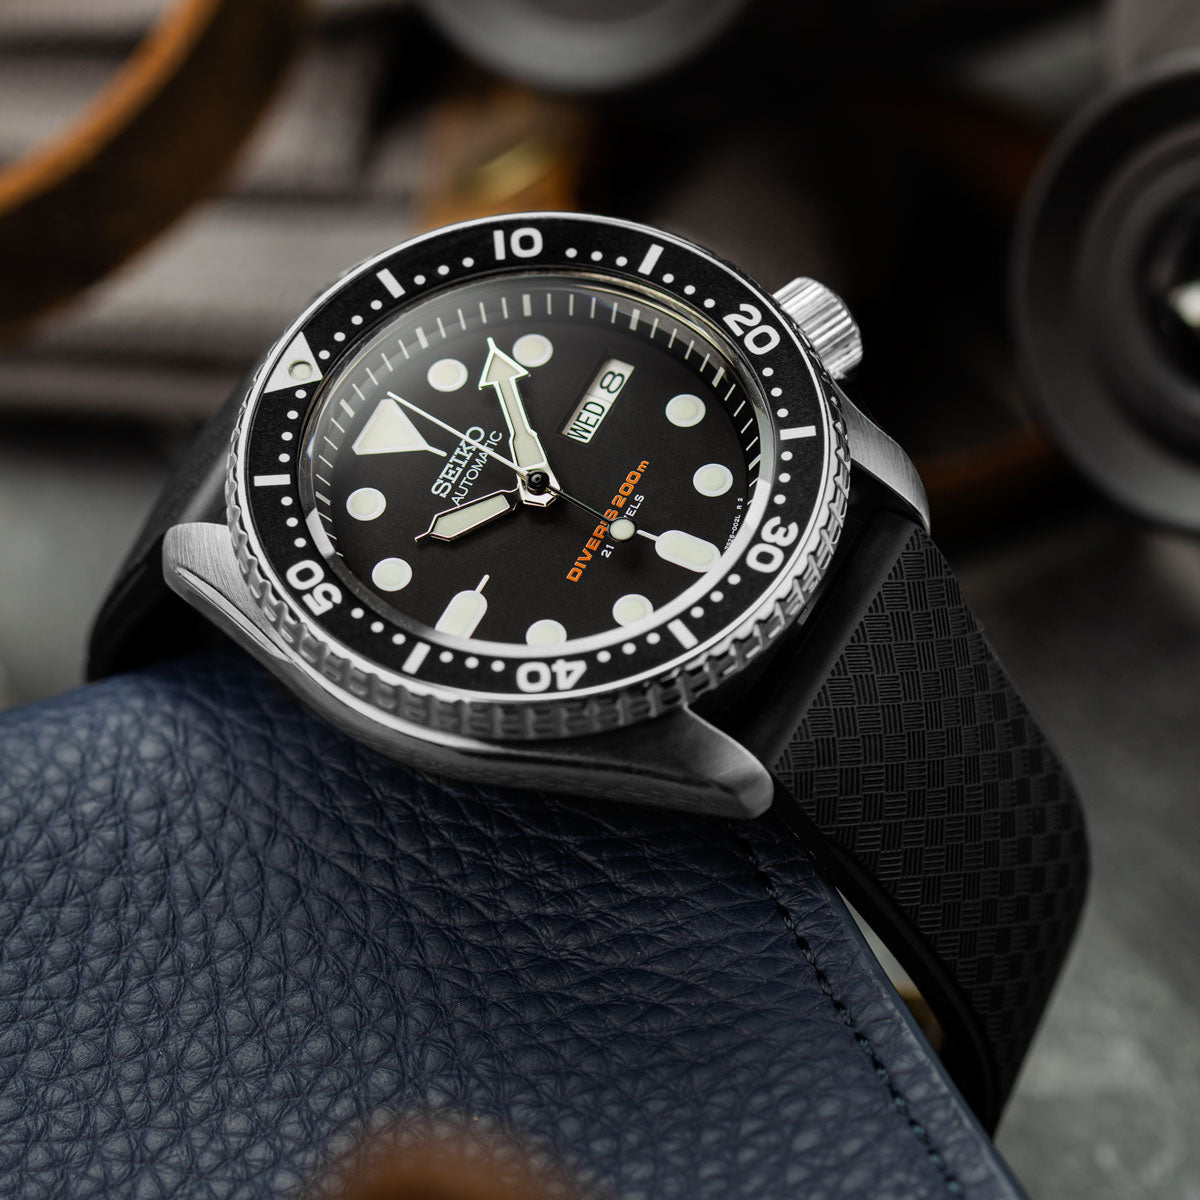 ZULUDIVER - Replacement Watch Straps Designed for Adventure